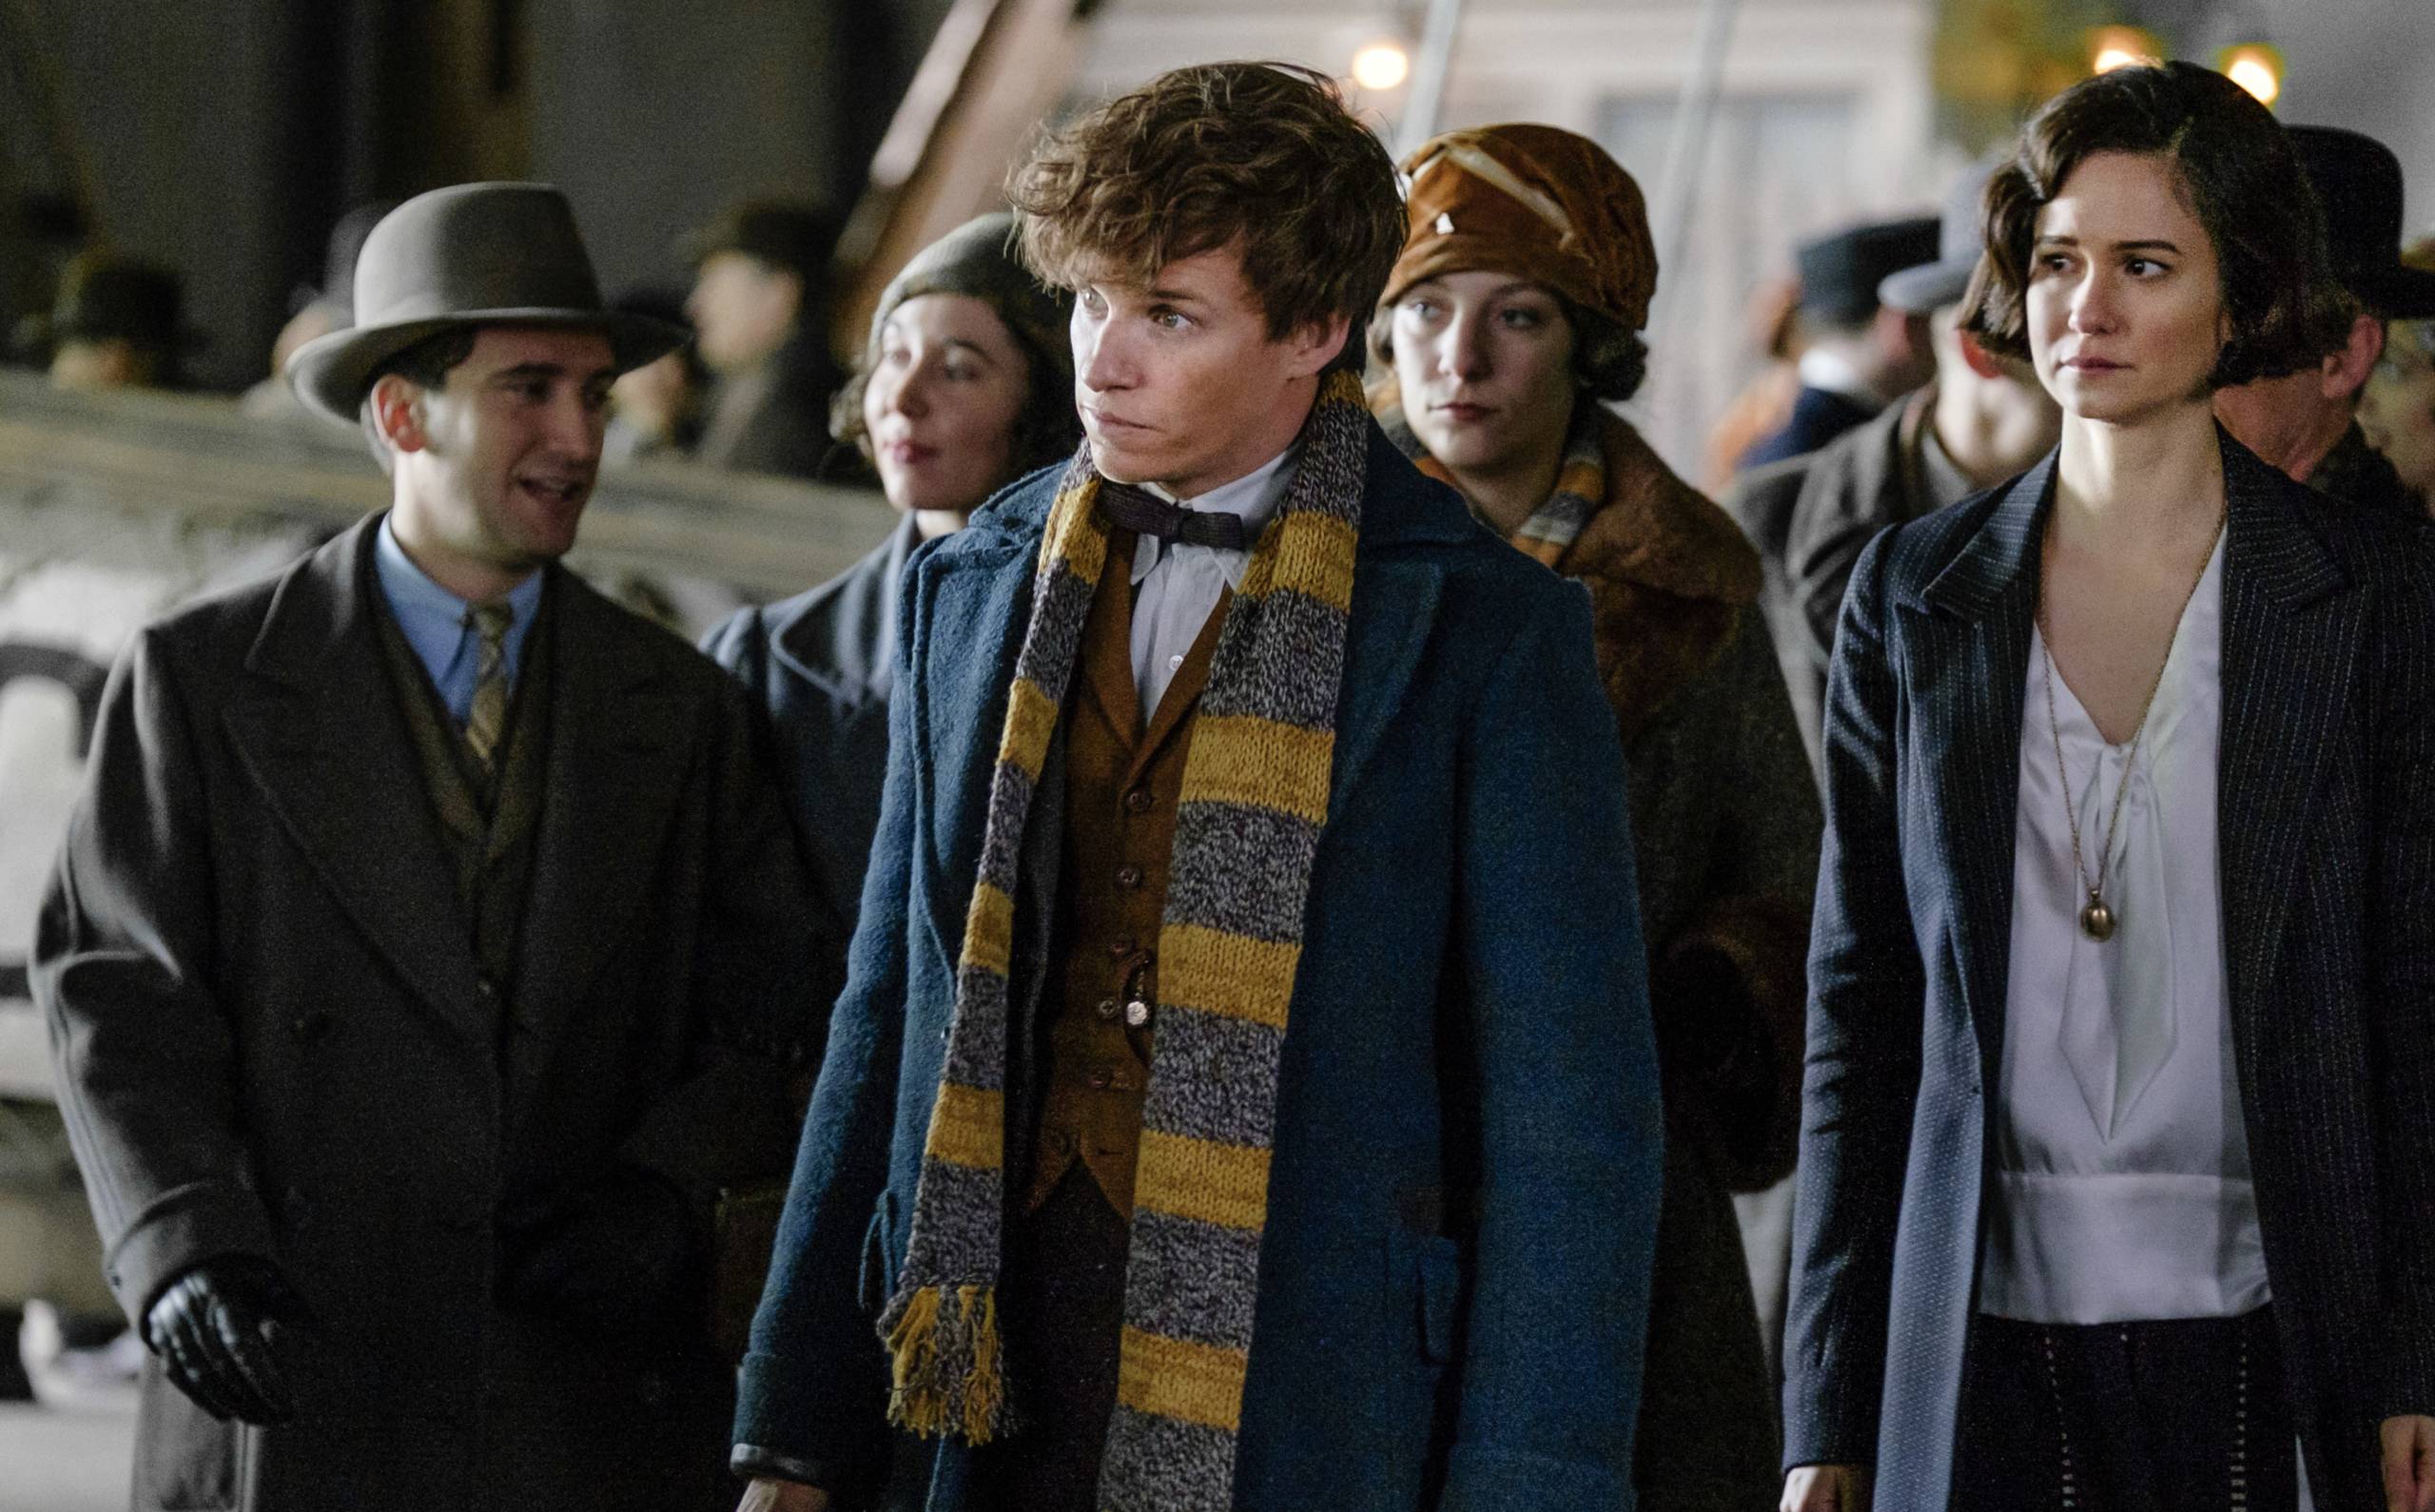 FB WB Newt Scamander in Hufflepuff Scarf with Tina Goldstein